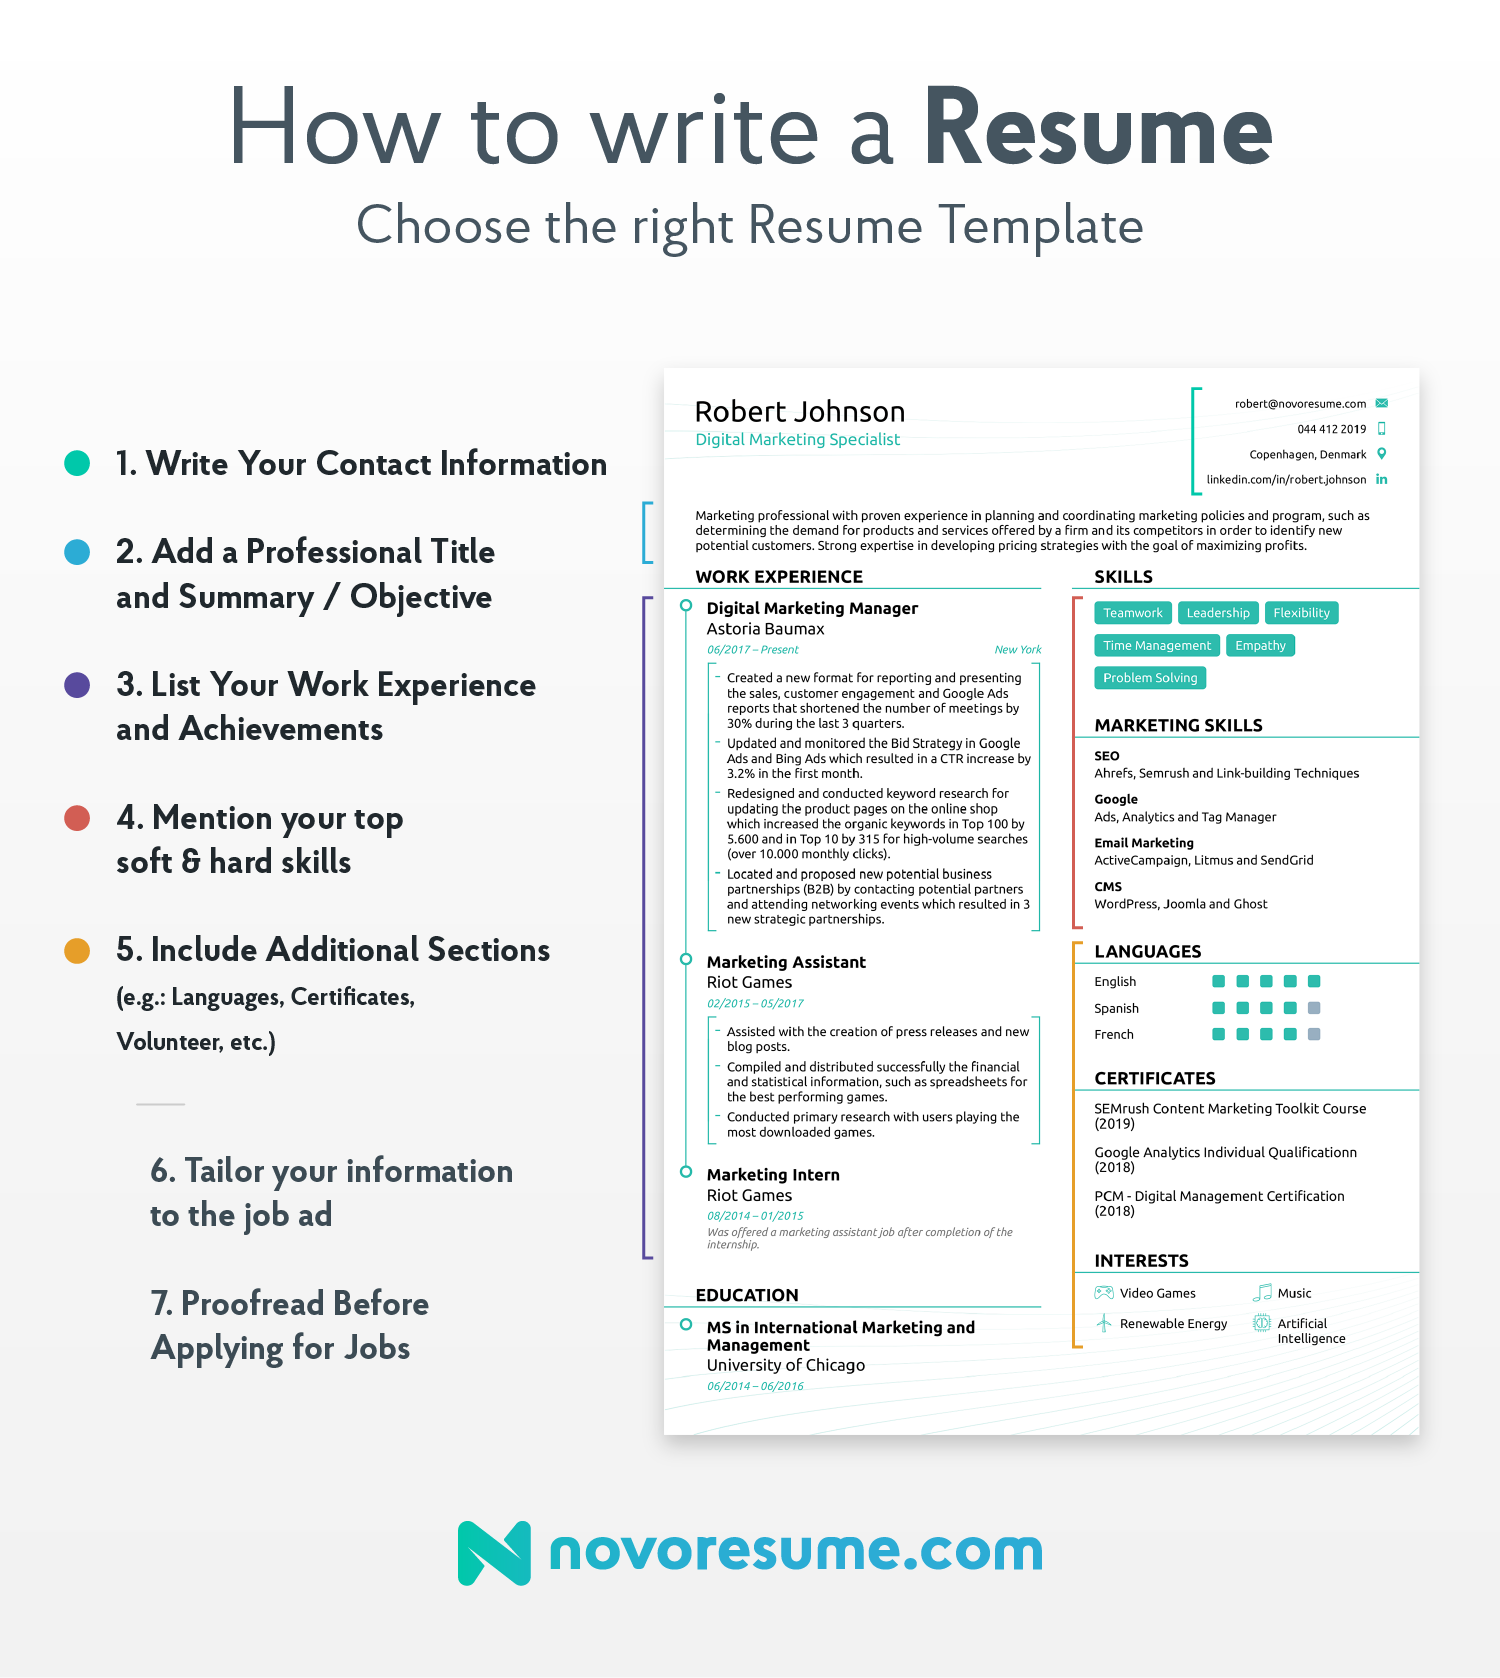 Creating A Resume How To Make A Resume creating a resume|wikiresume.com